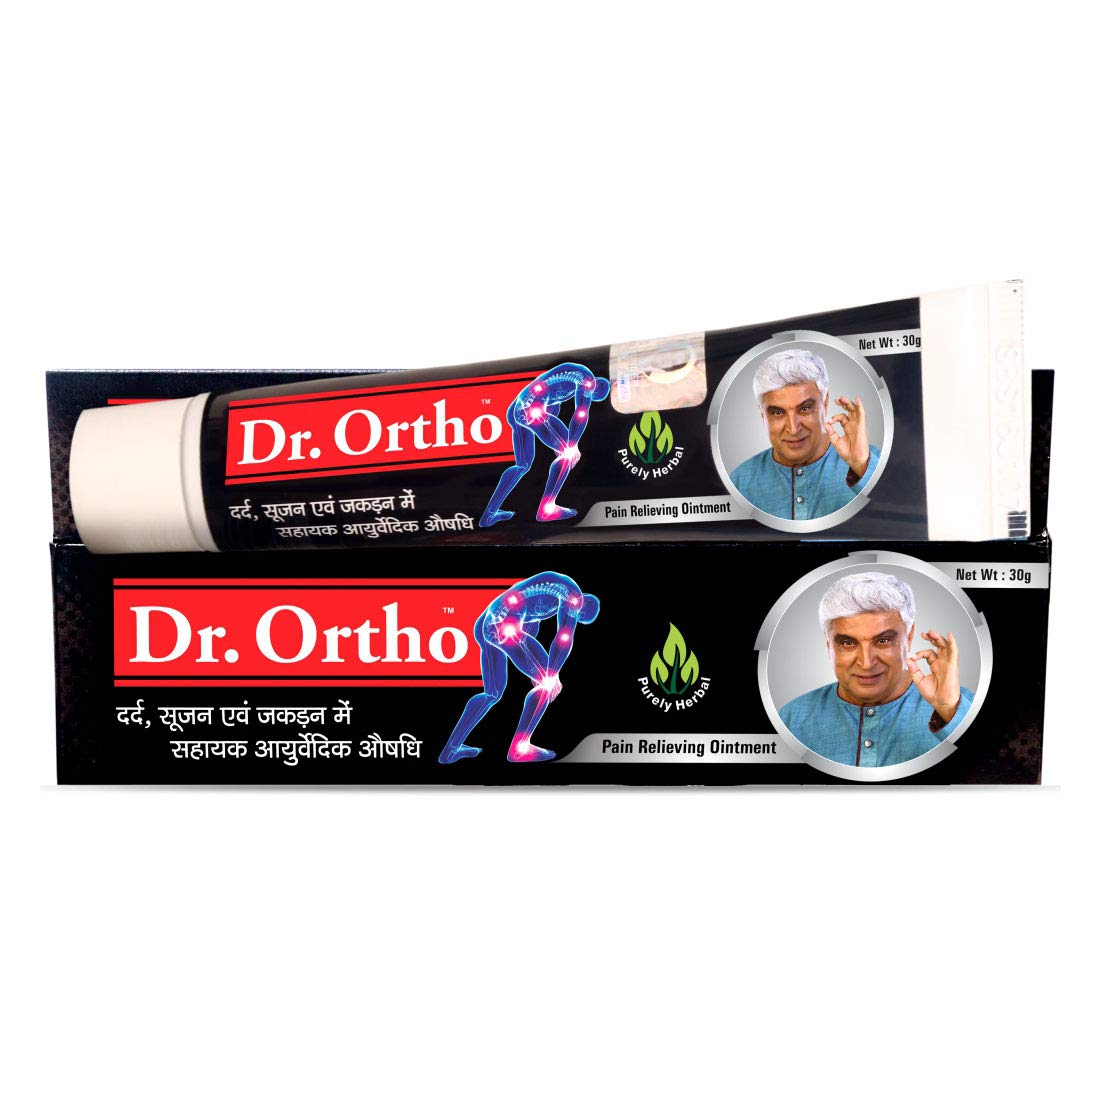 Dr Ortho - Ayurvedic Pain Relieving Ointment (30gm) (Pack of 2)